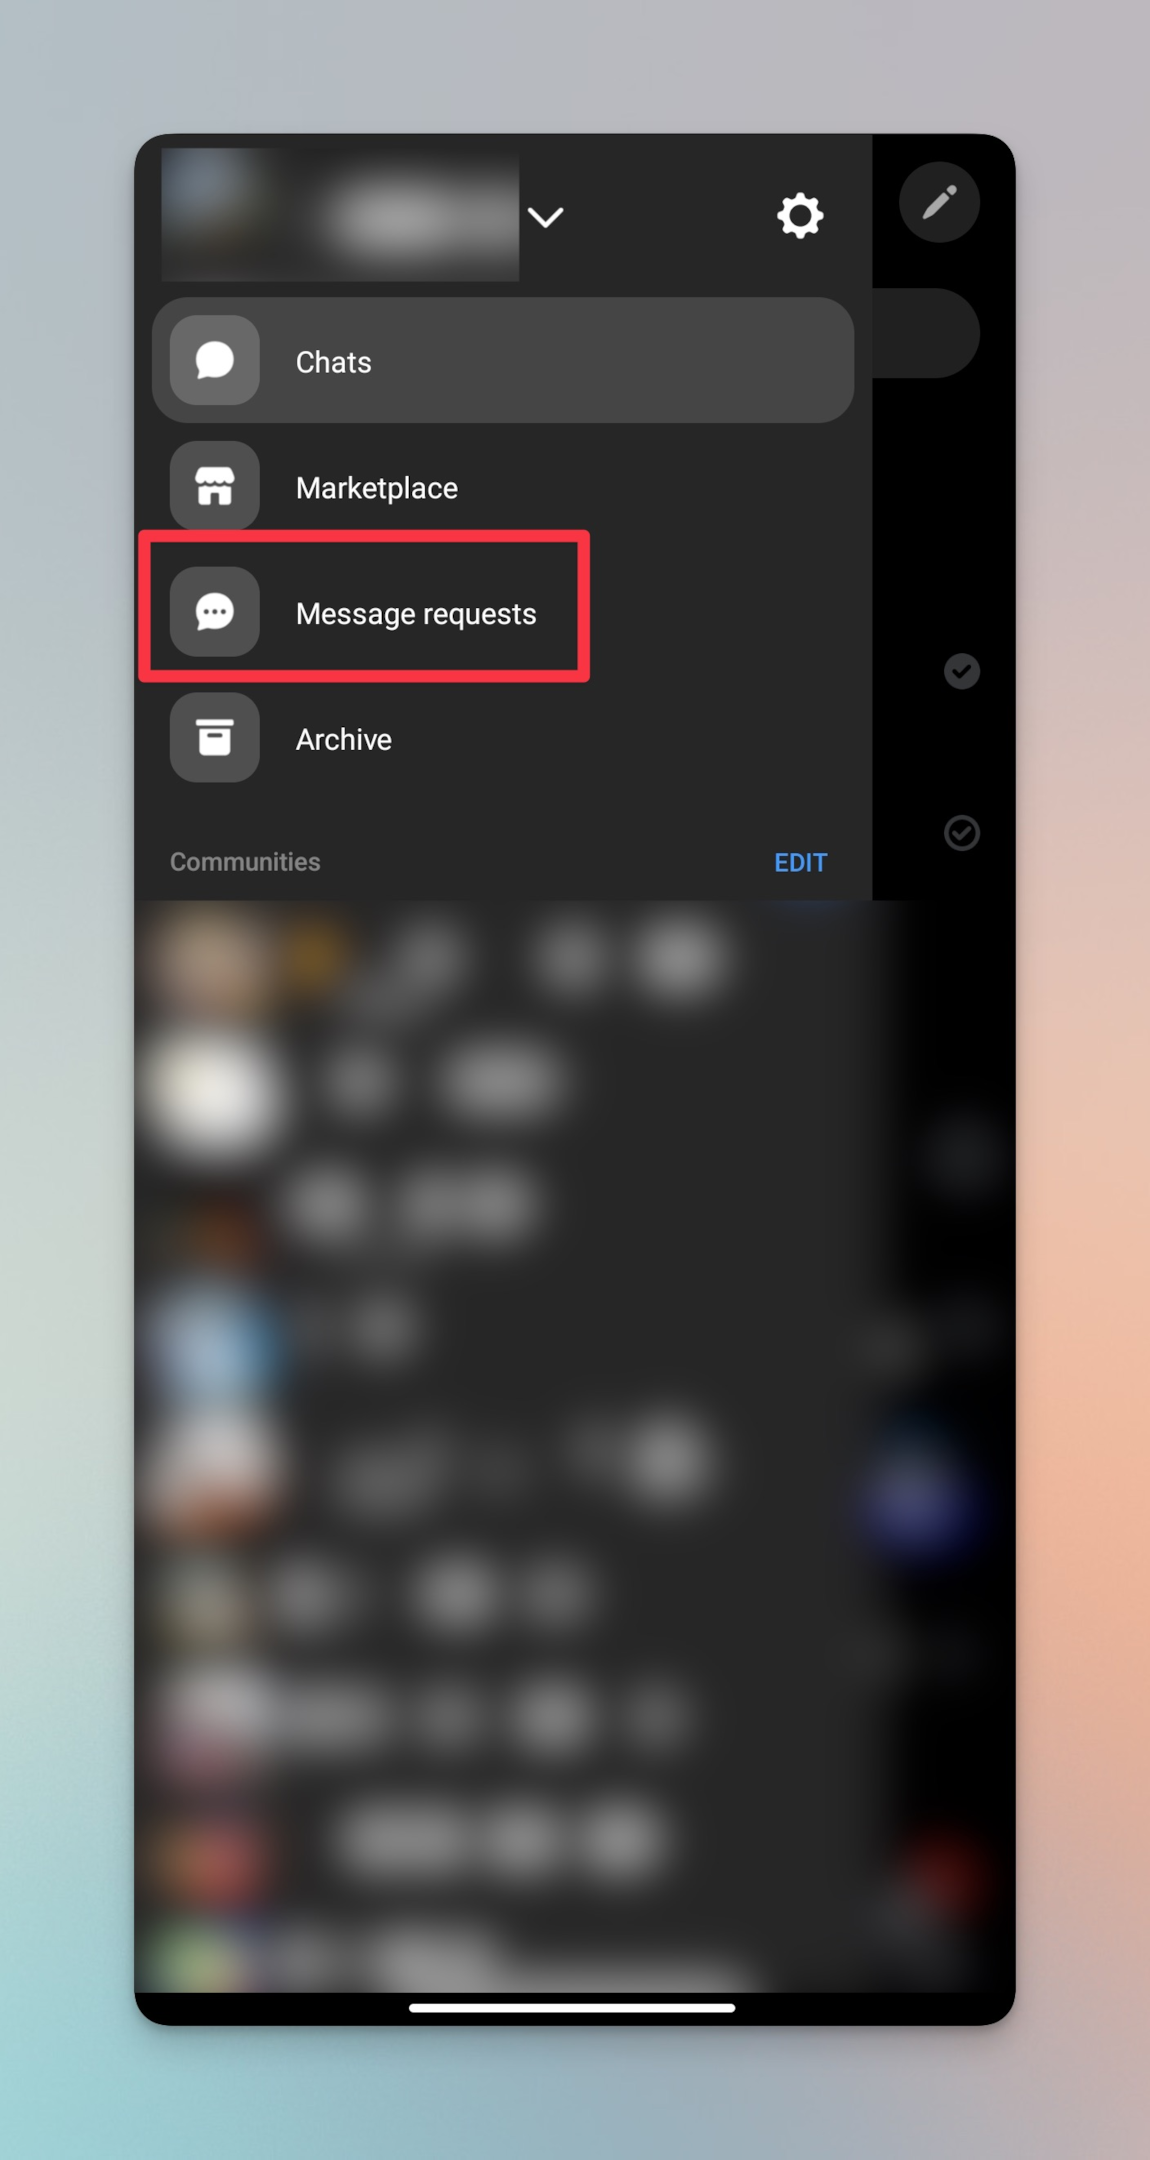 Remote.tools showing "message requests" menu on Facebook messenger for android